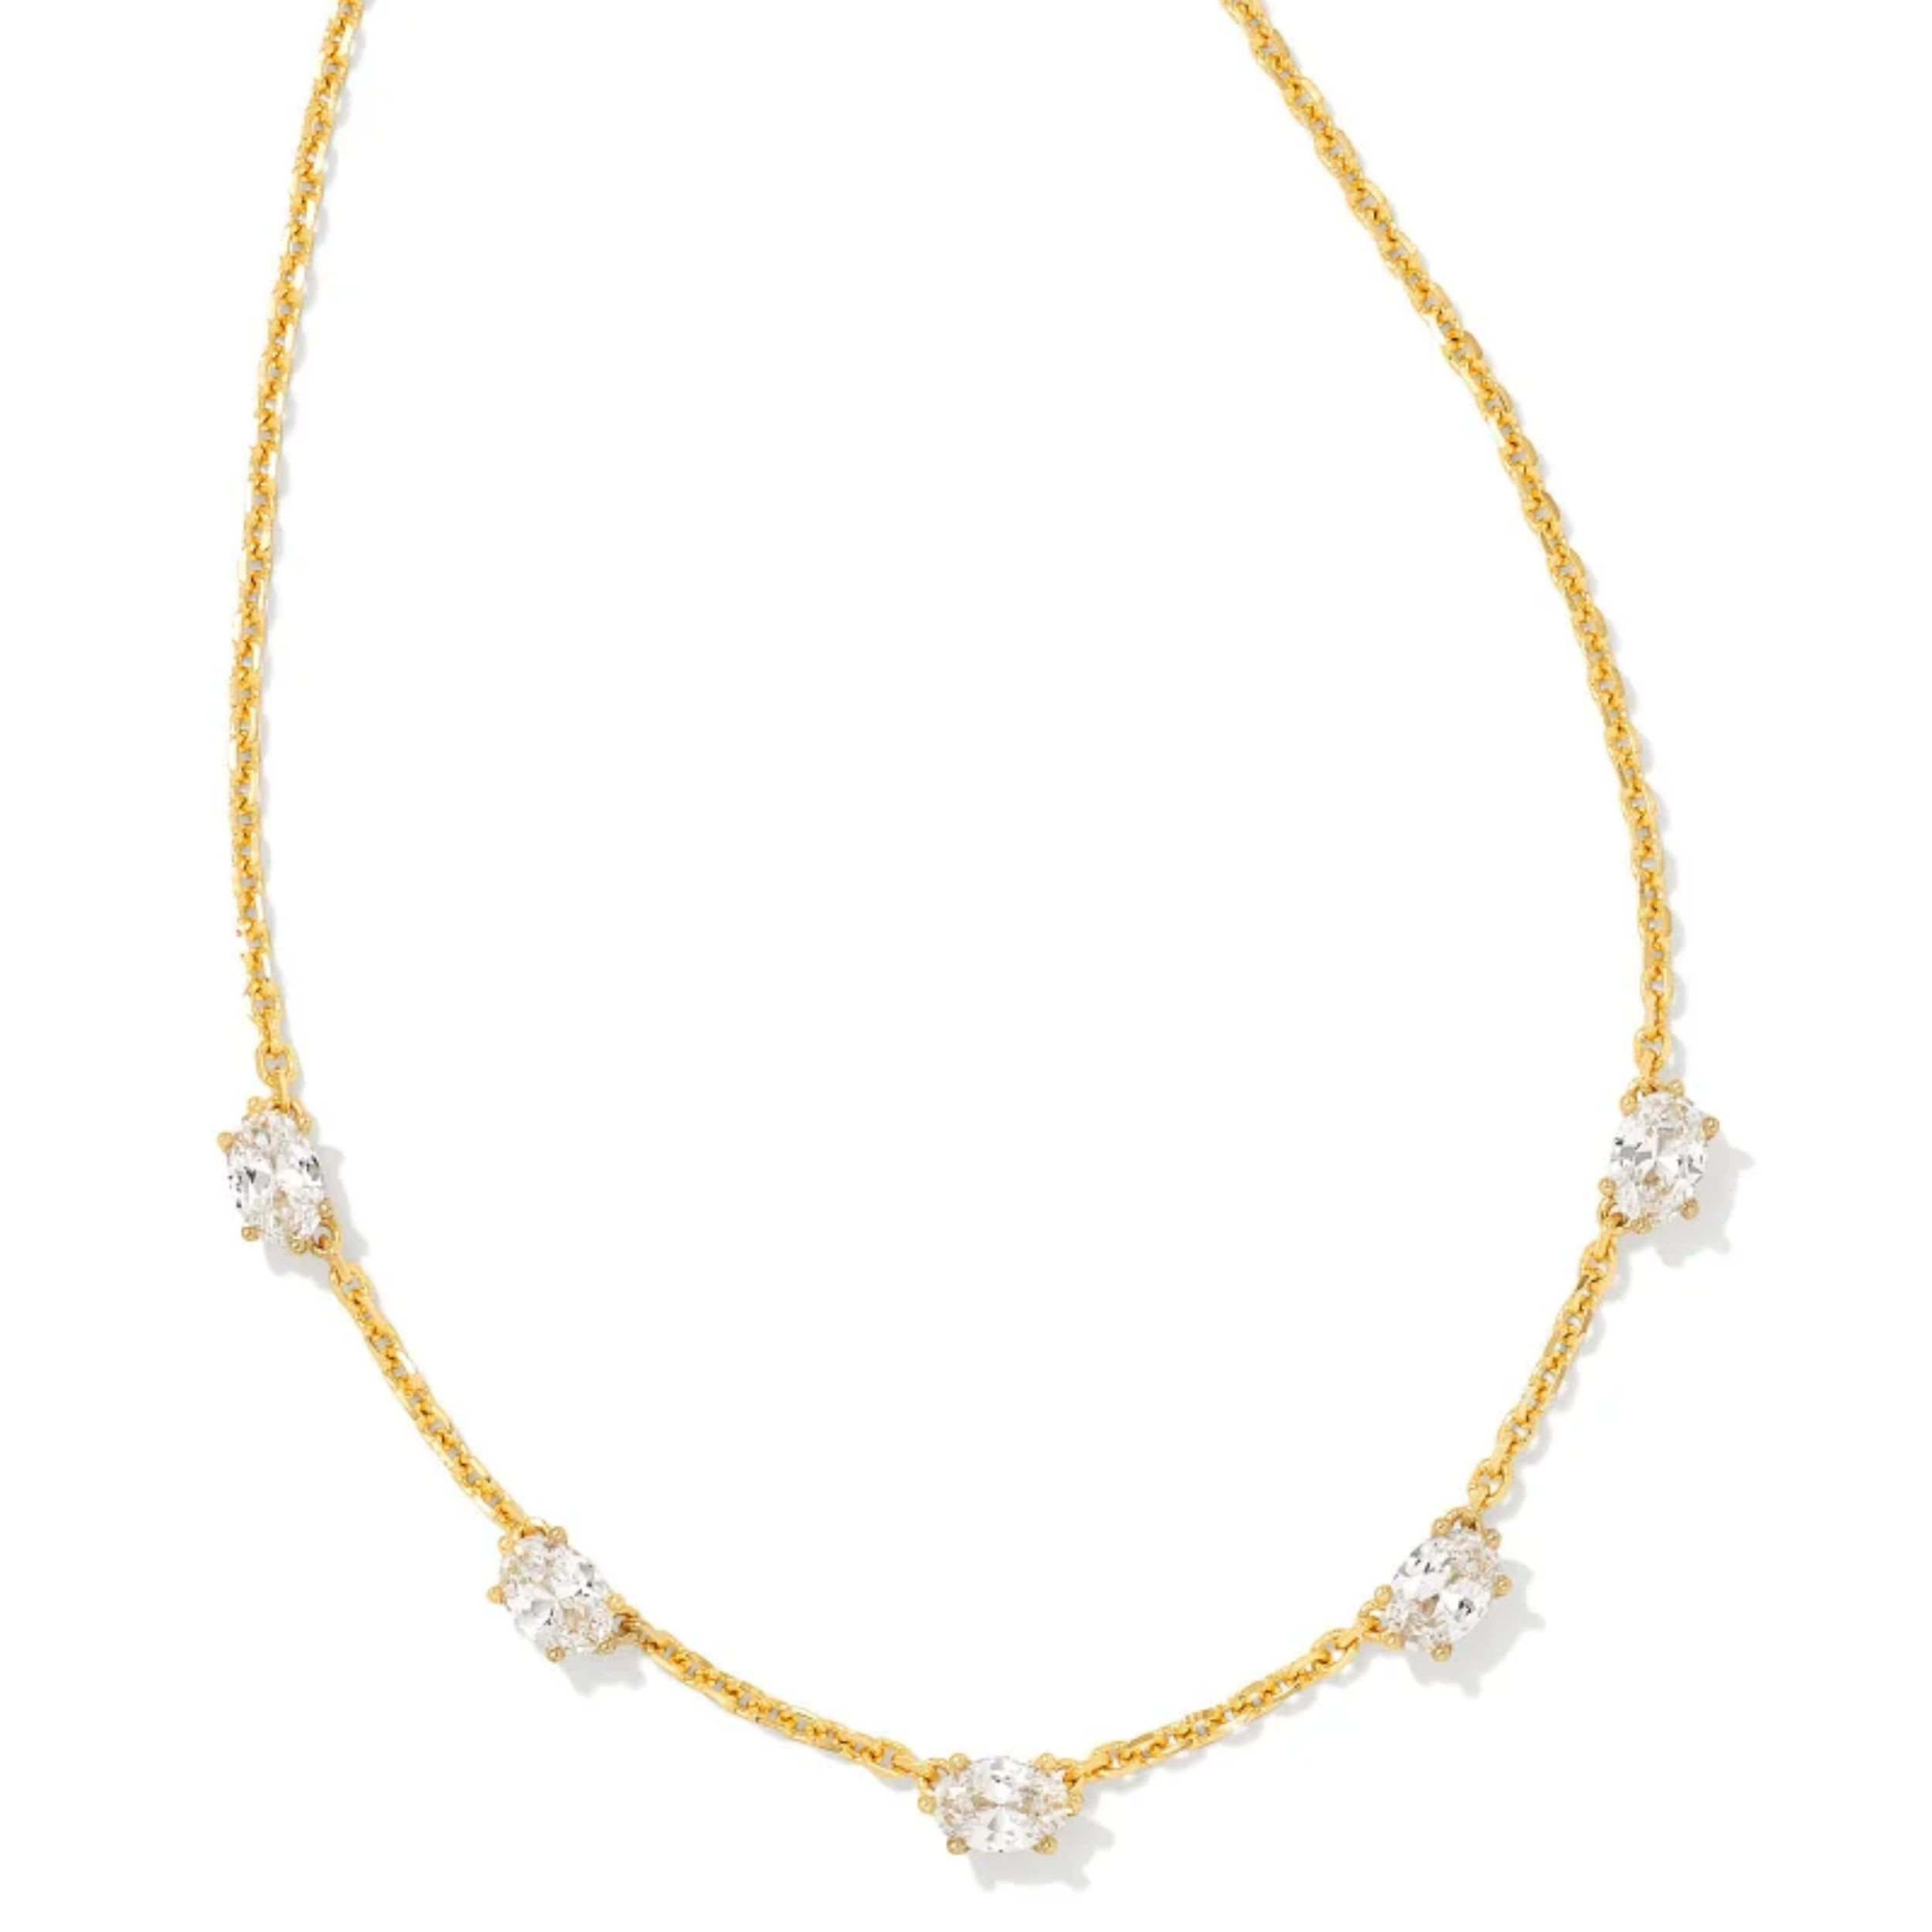 This Cailin Gold Crystal Strand Necklace in Metal White by Kendra Scott is pictured on a white background.